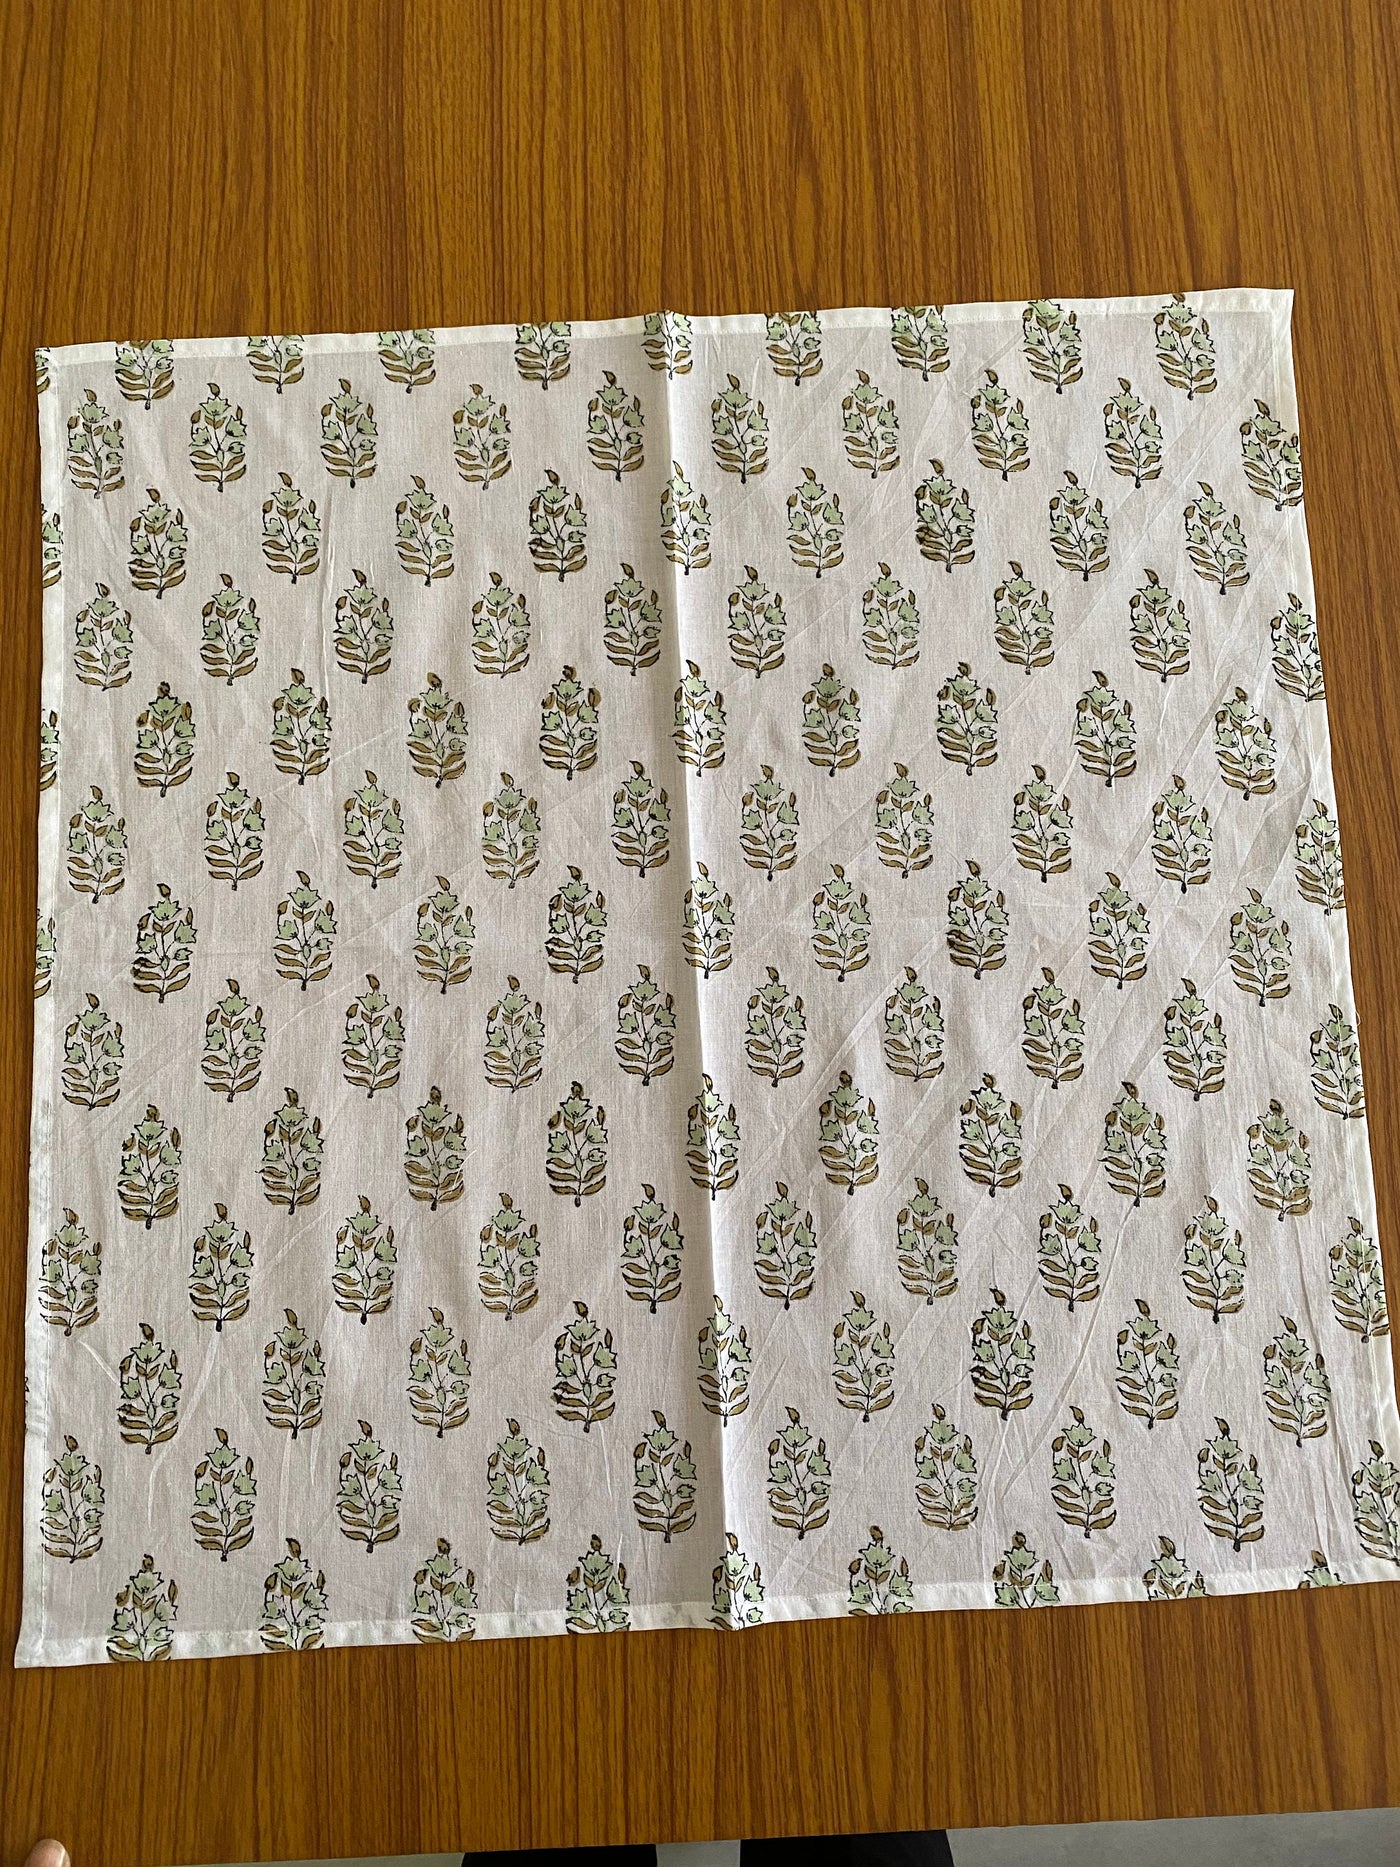 Mint, Olive Green on White Indian Hand Block Floral Printed 100% Pure Cotton Cloth Napkins, 18x18"- Cocktail Napkins, 20x20"- Dinner Napkins